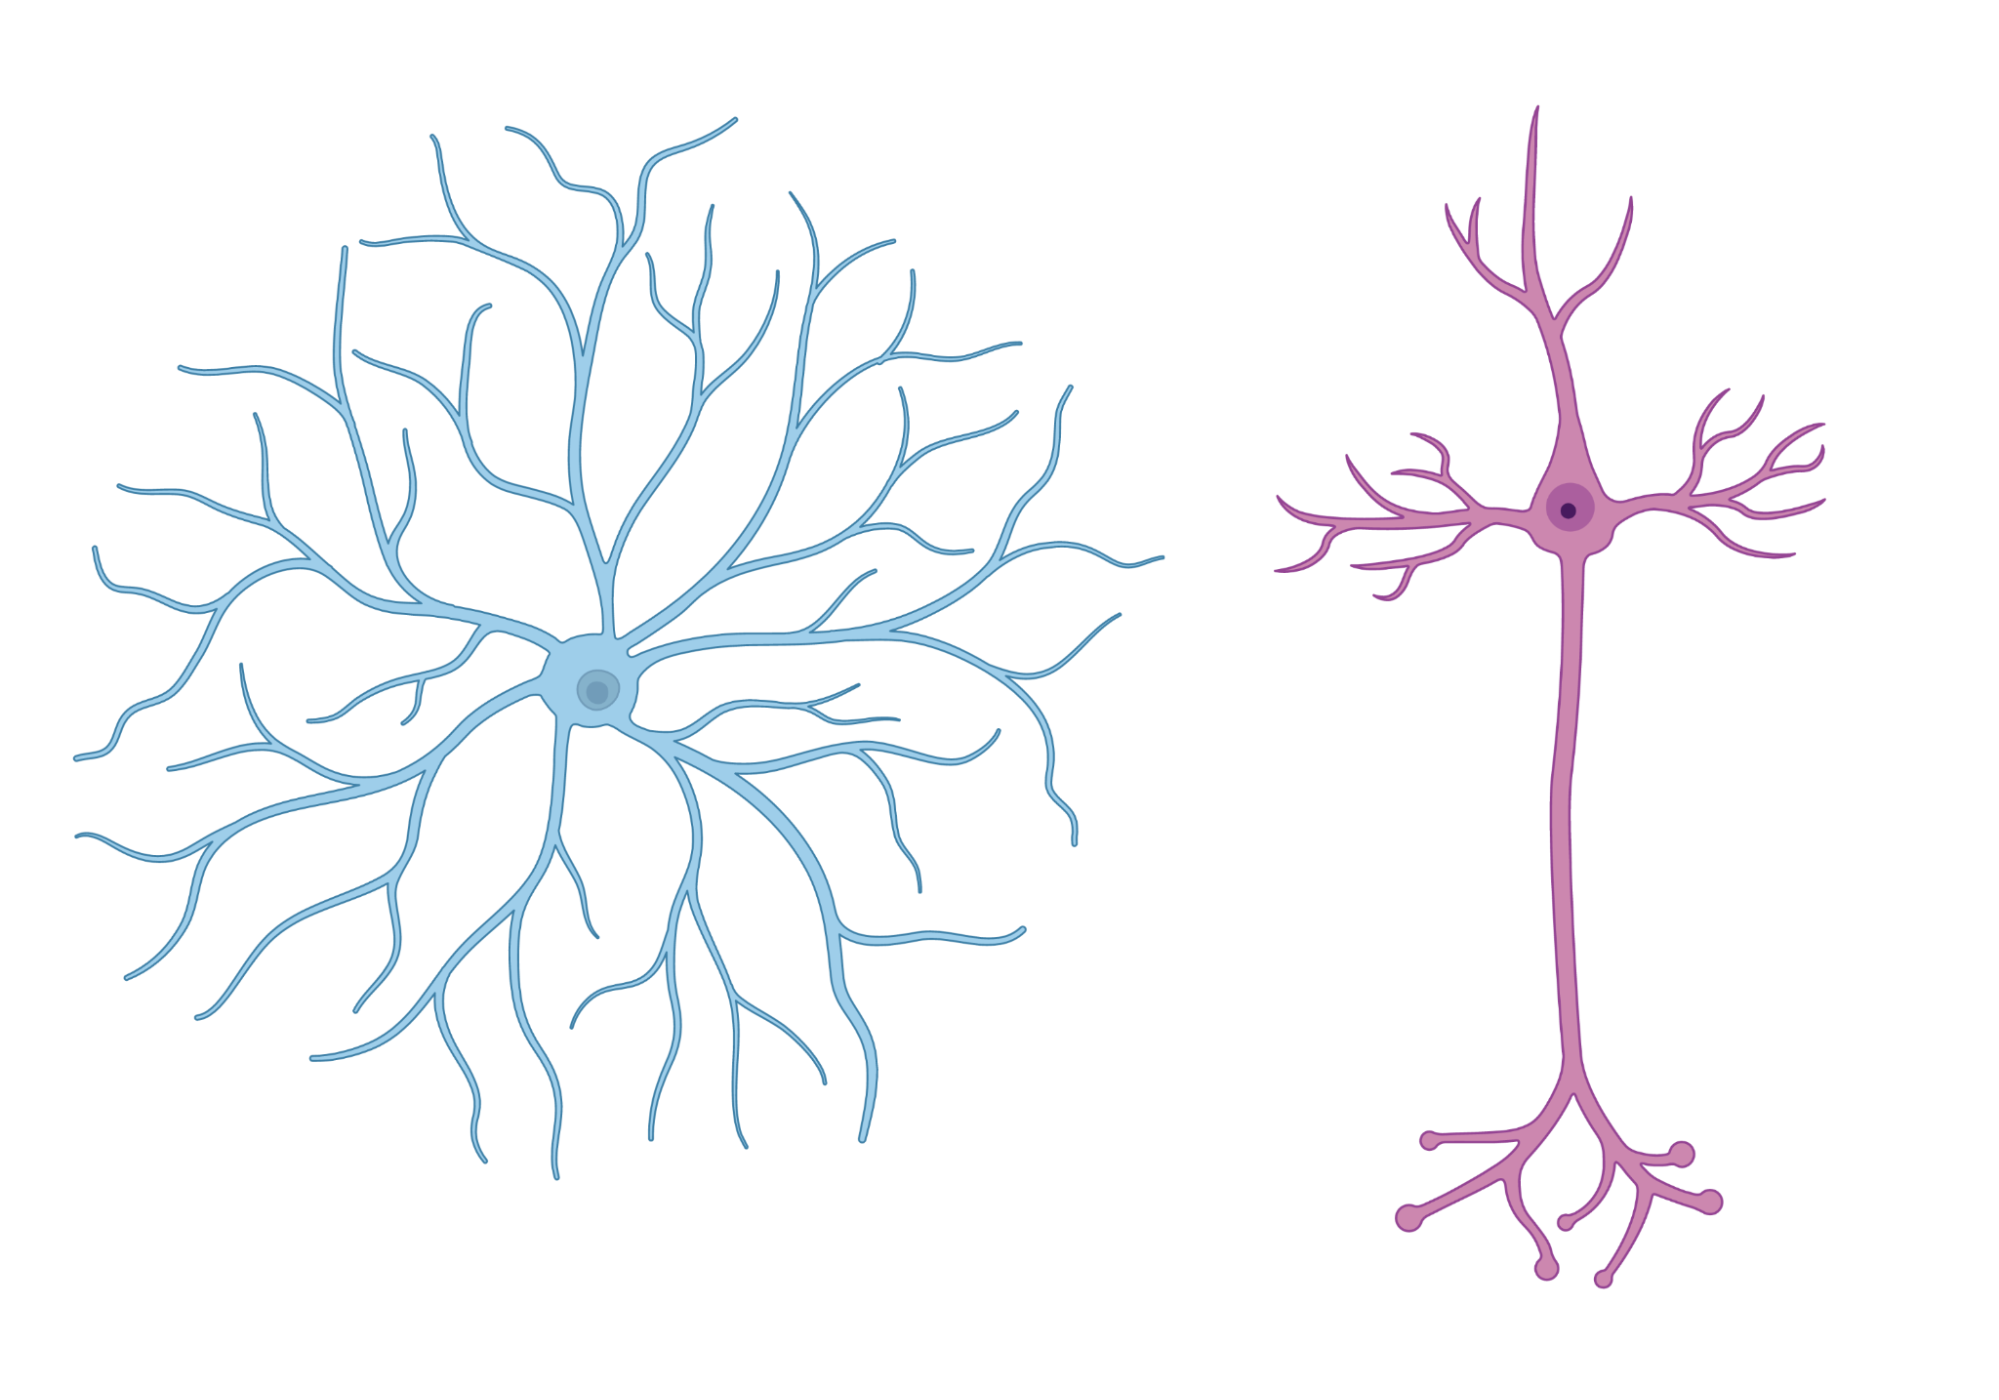 The neuron on the left has a star-shaped appearance, with many skinny dendrites branching out from the central cell body. The neuron on the right has a triangularly shaped cell body with a few short dendrites and one thick long axon culminating in several axon terminal branches at the bottom.